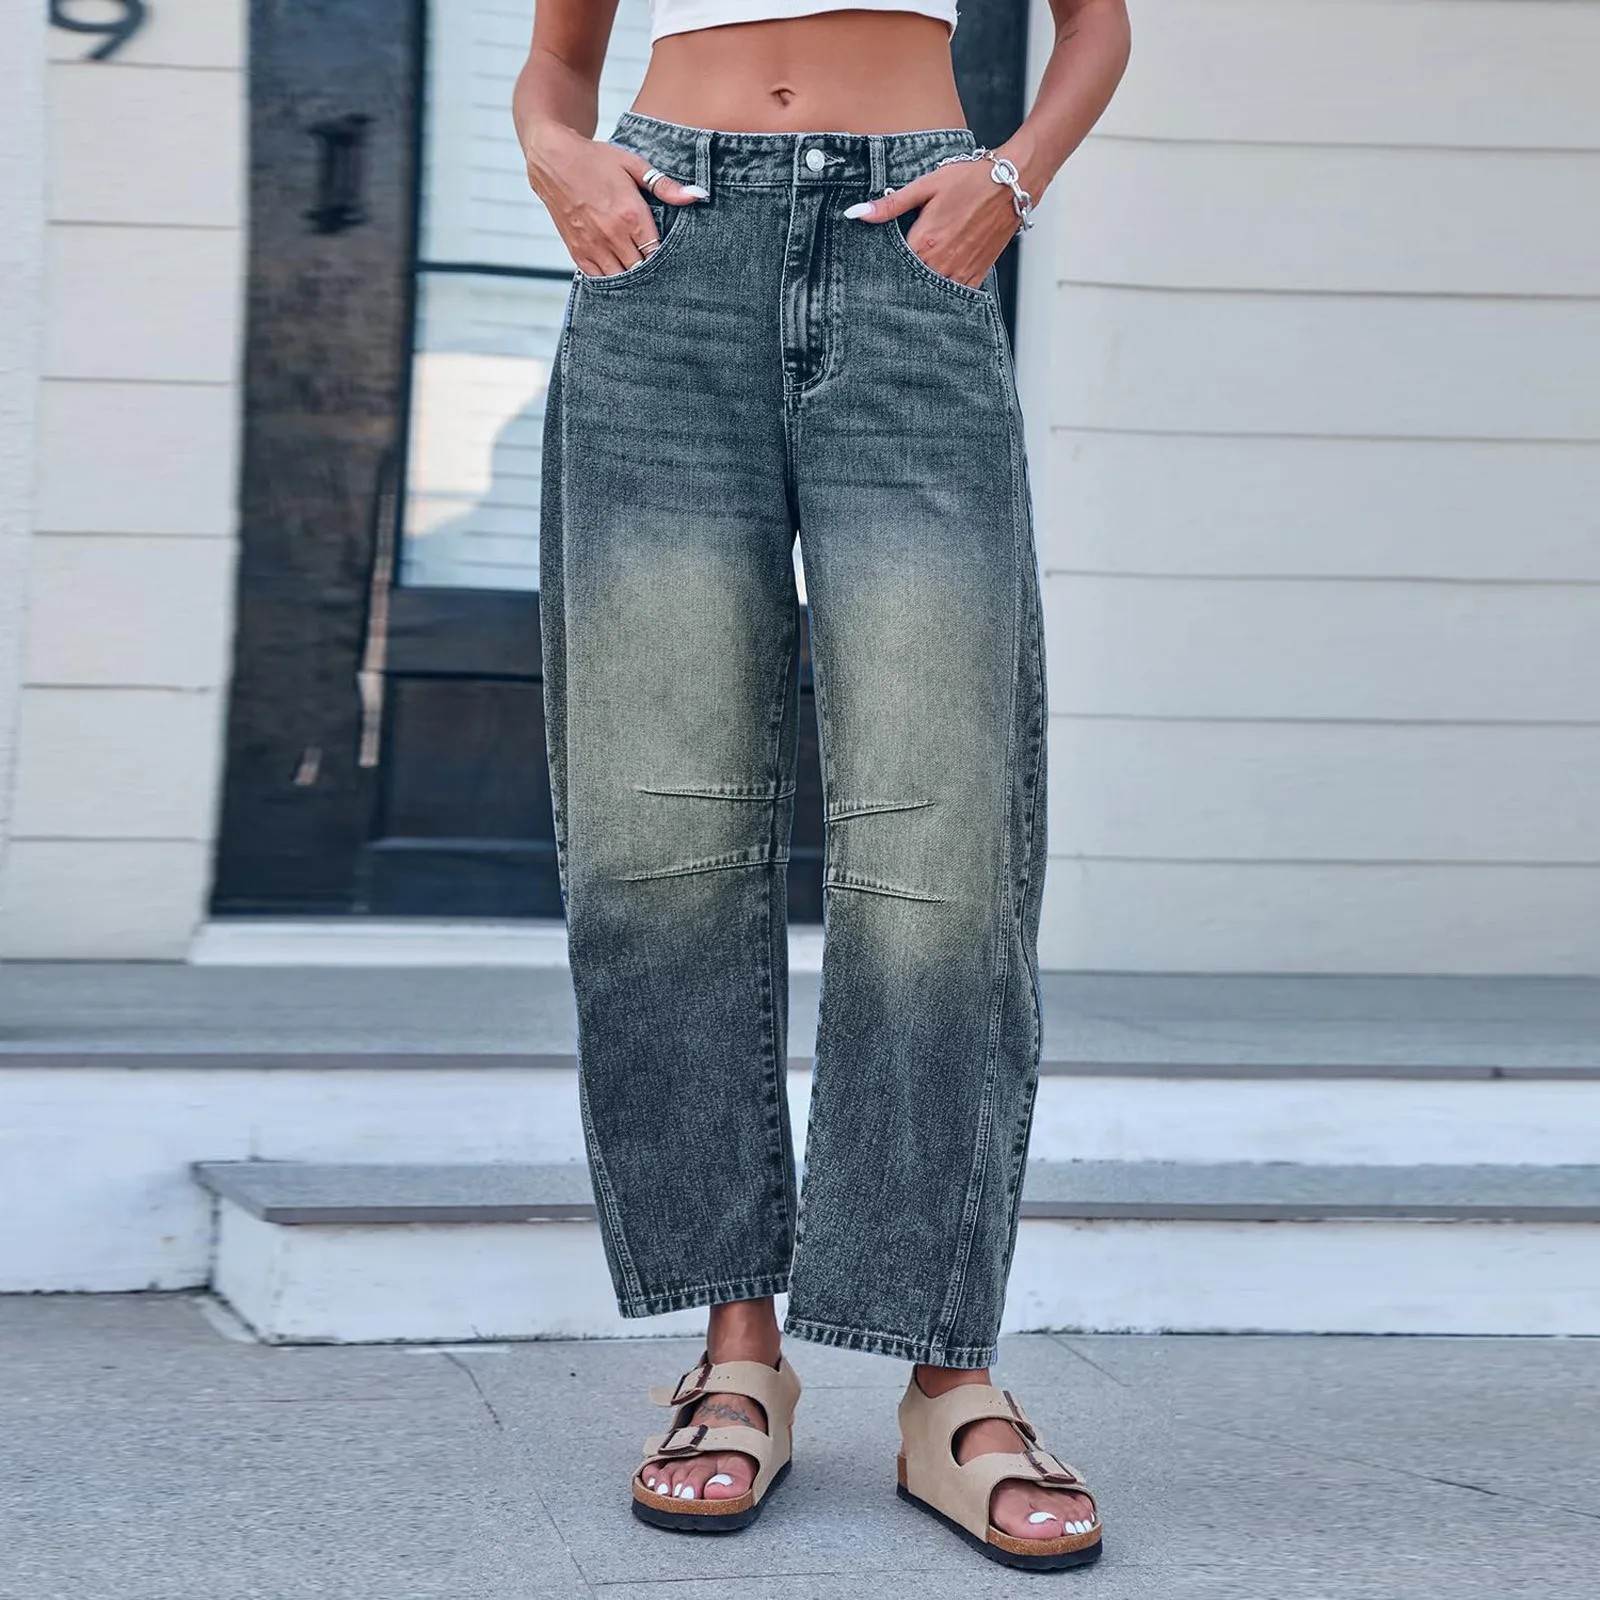 

Cropped Jeans for Women y2k Aesthetic Solid Color Low Waist Baggy Denim Trousers 2000s Fashion Boyfriend Tapered Pants